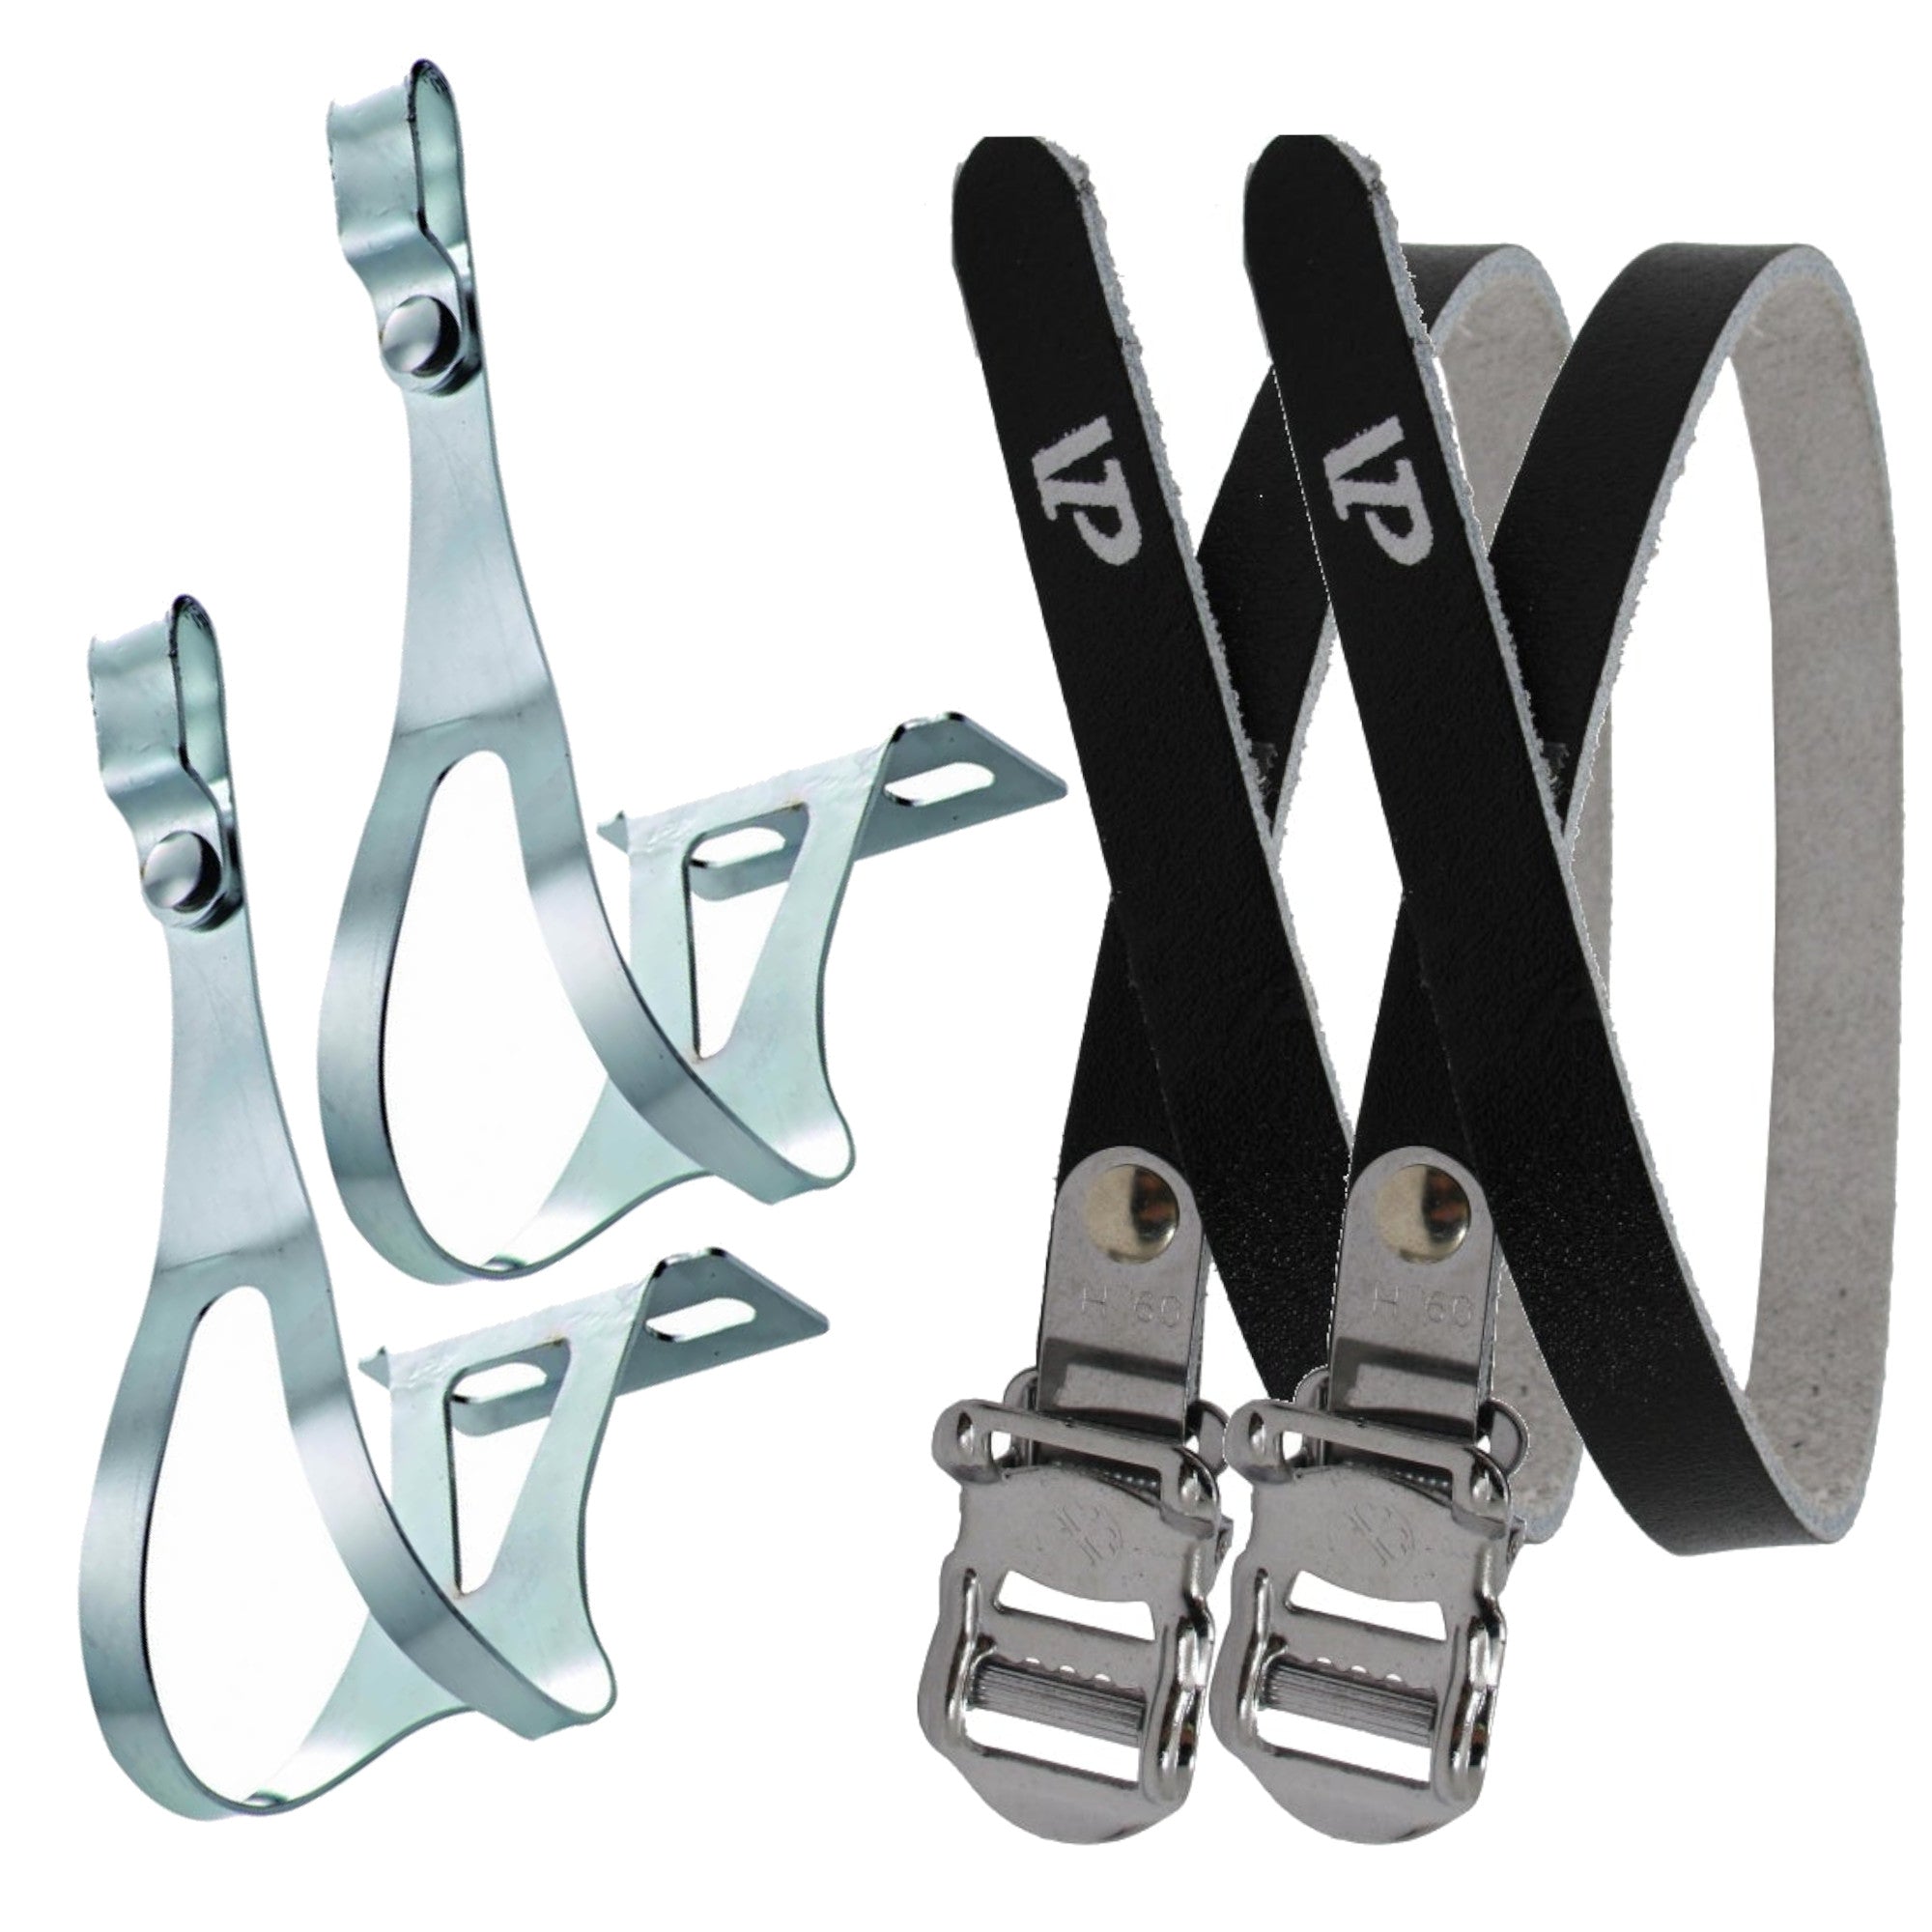 Classic Chrome Medium Size Steel Toe Clips With Black Leather Straps - The Bikesmiths